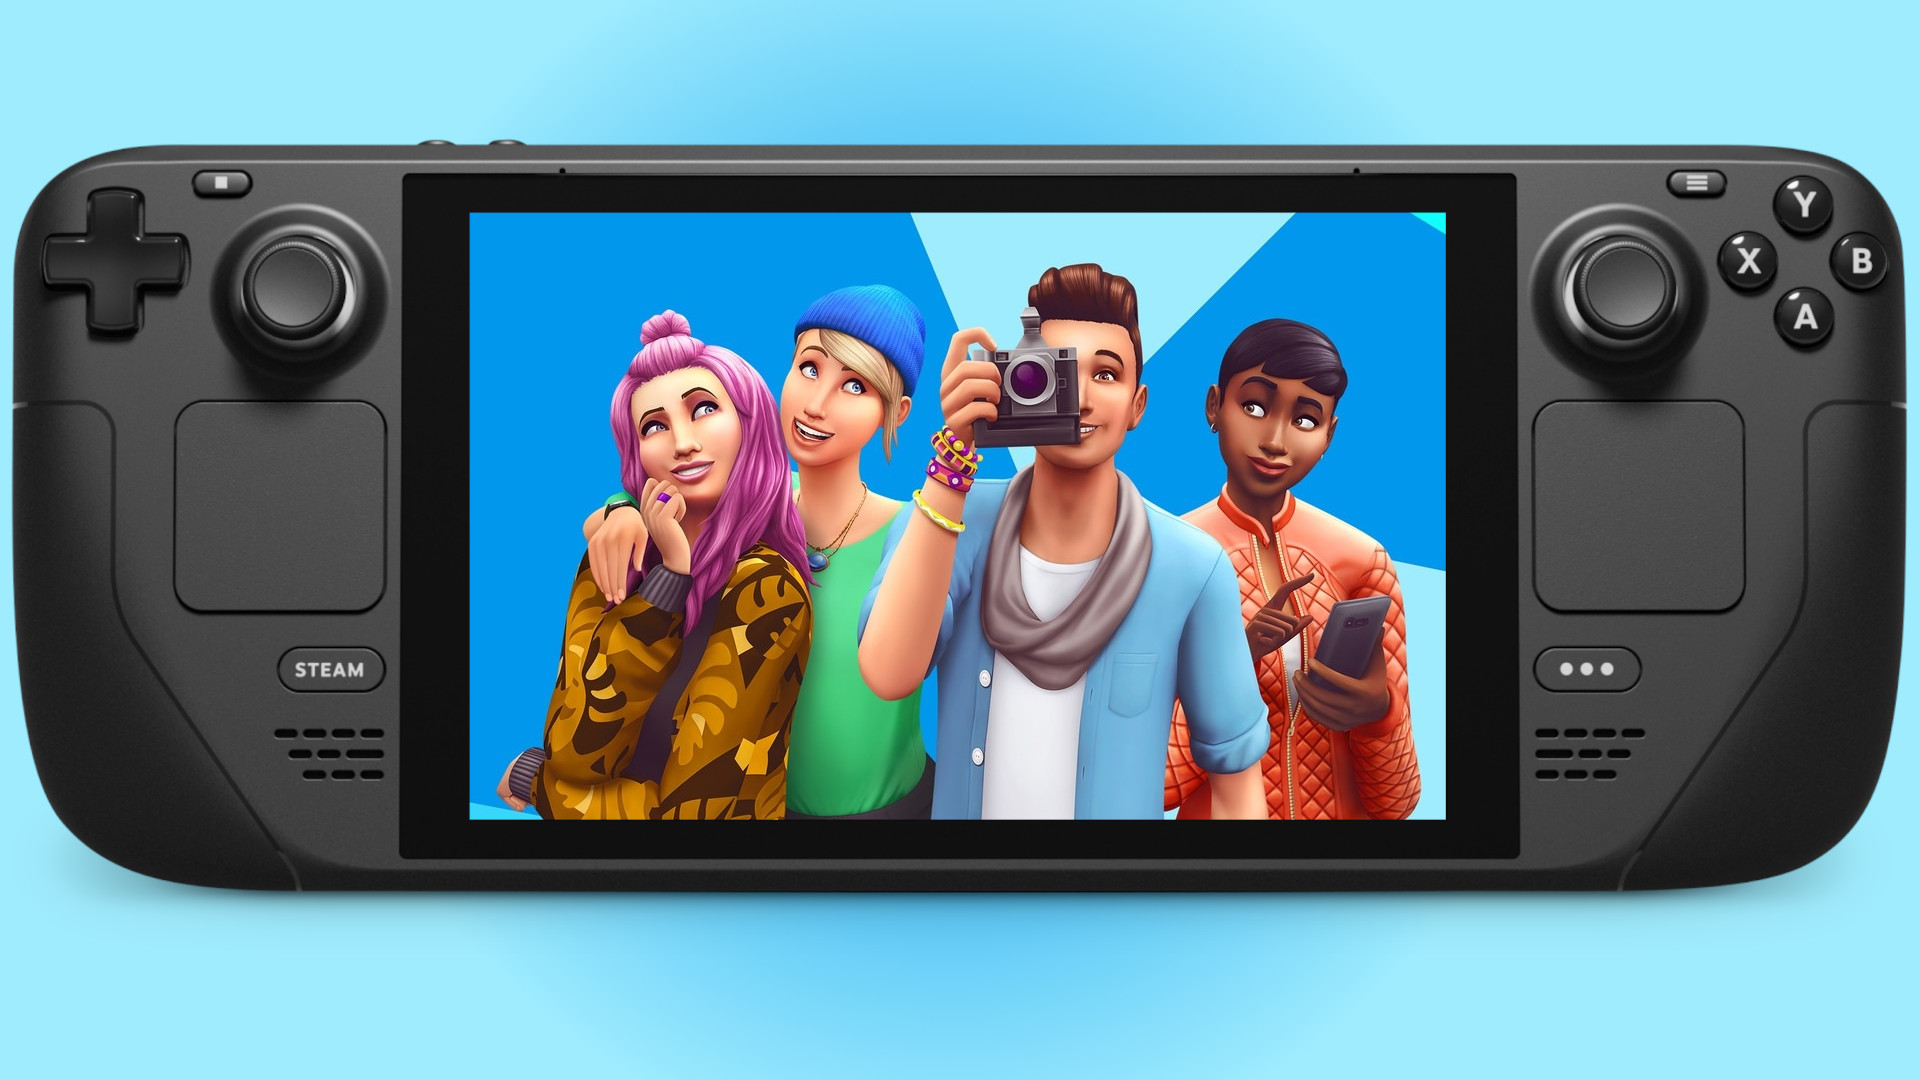 5 Upcoming Steam Deck Games Similar to The Sims 4